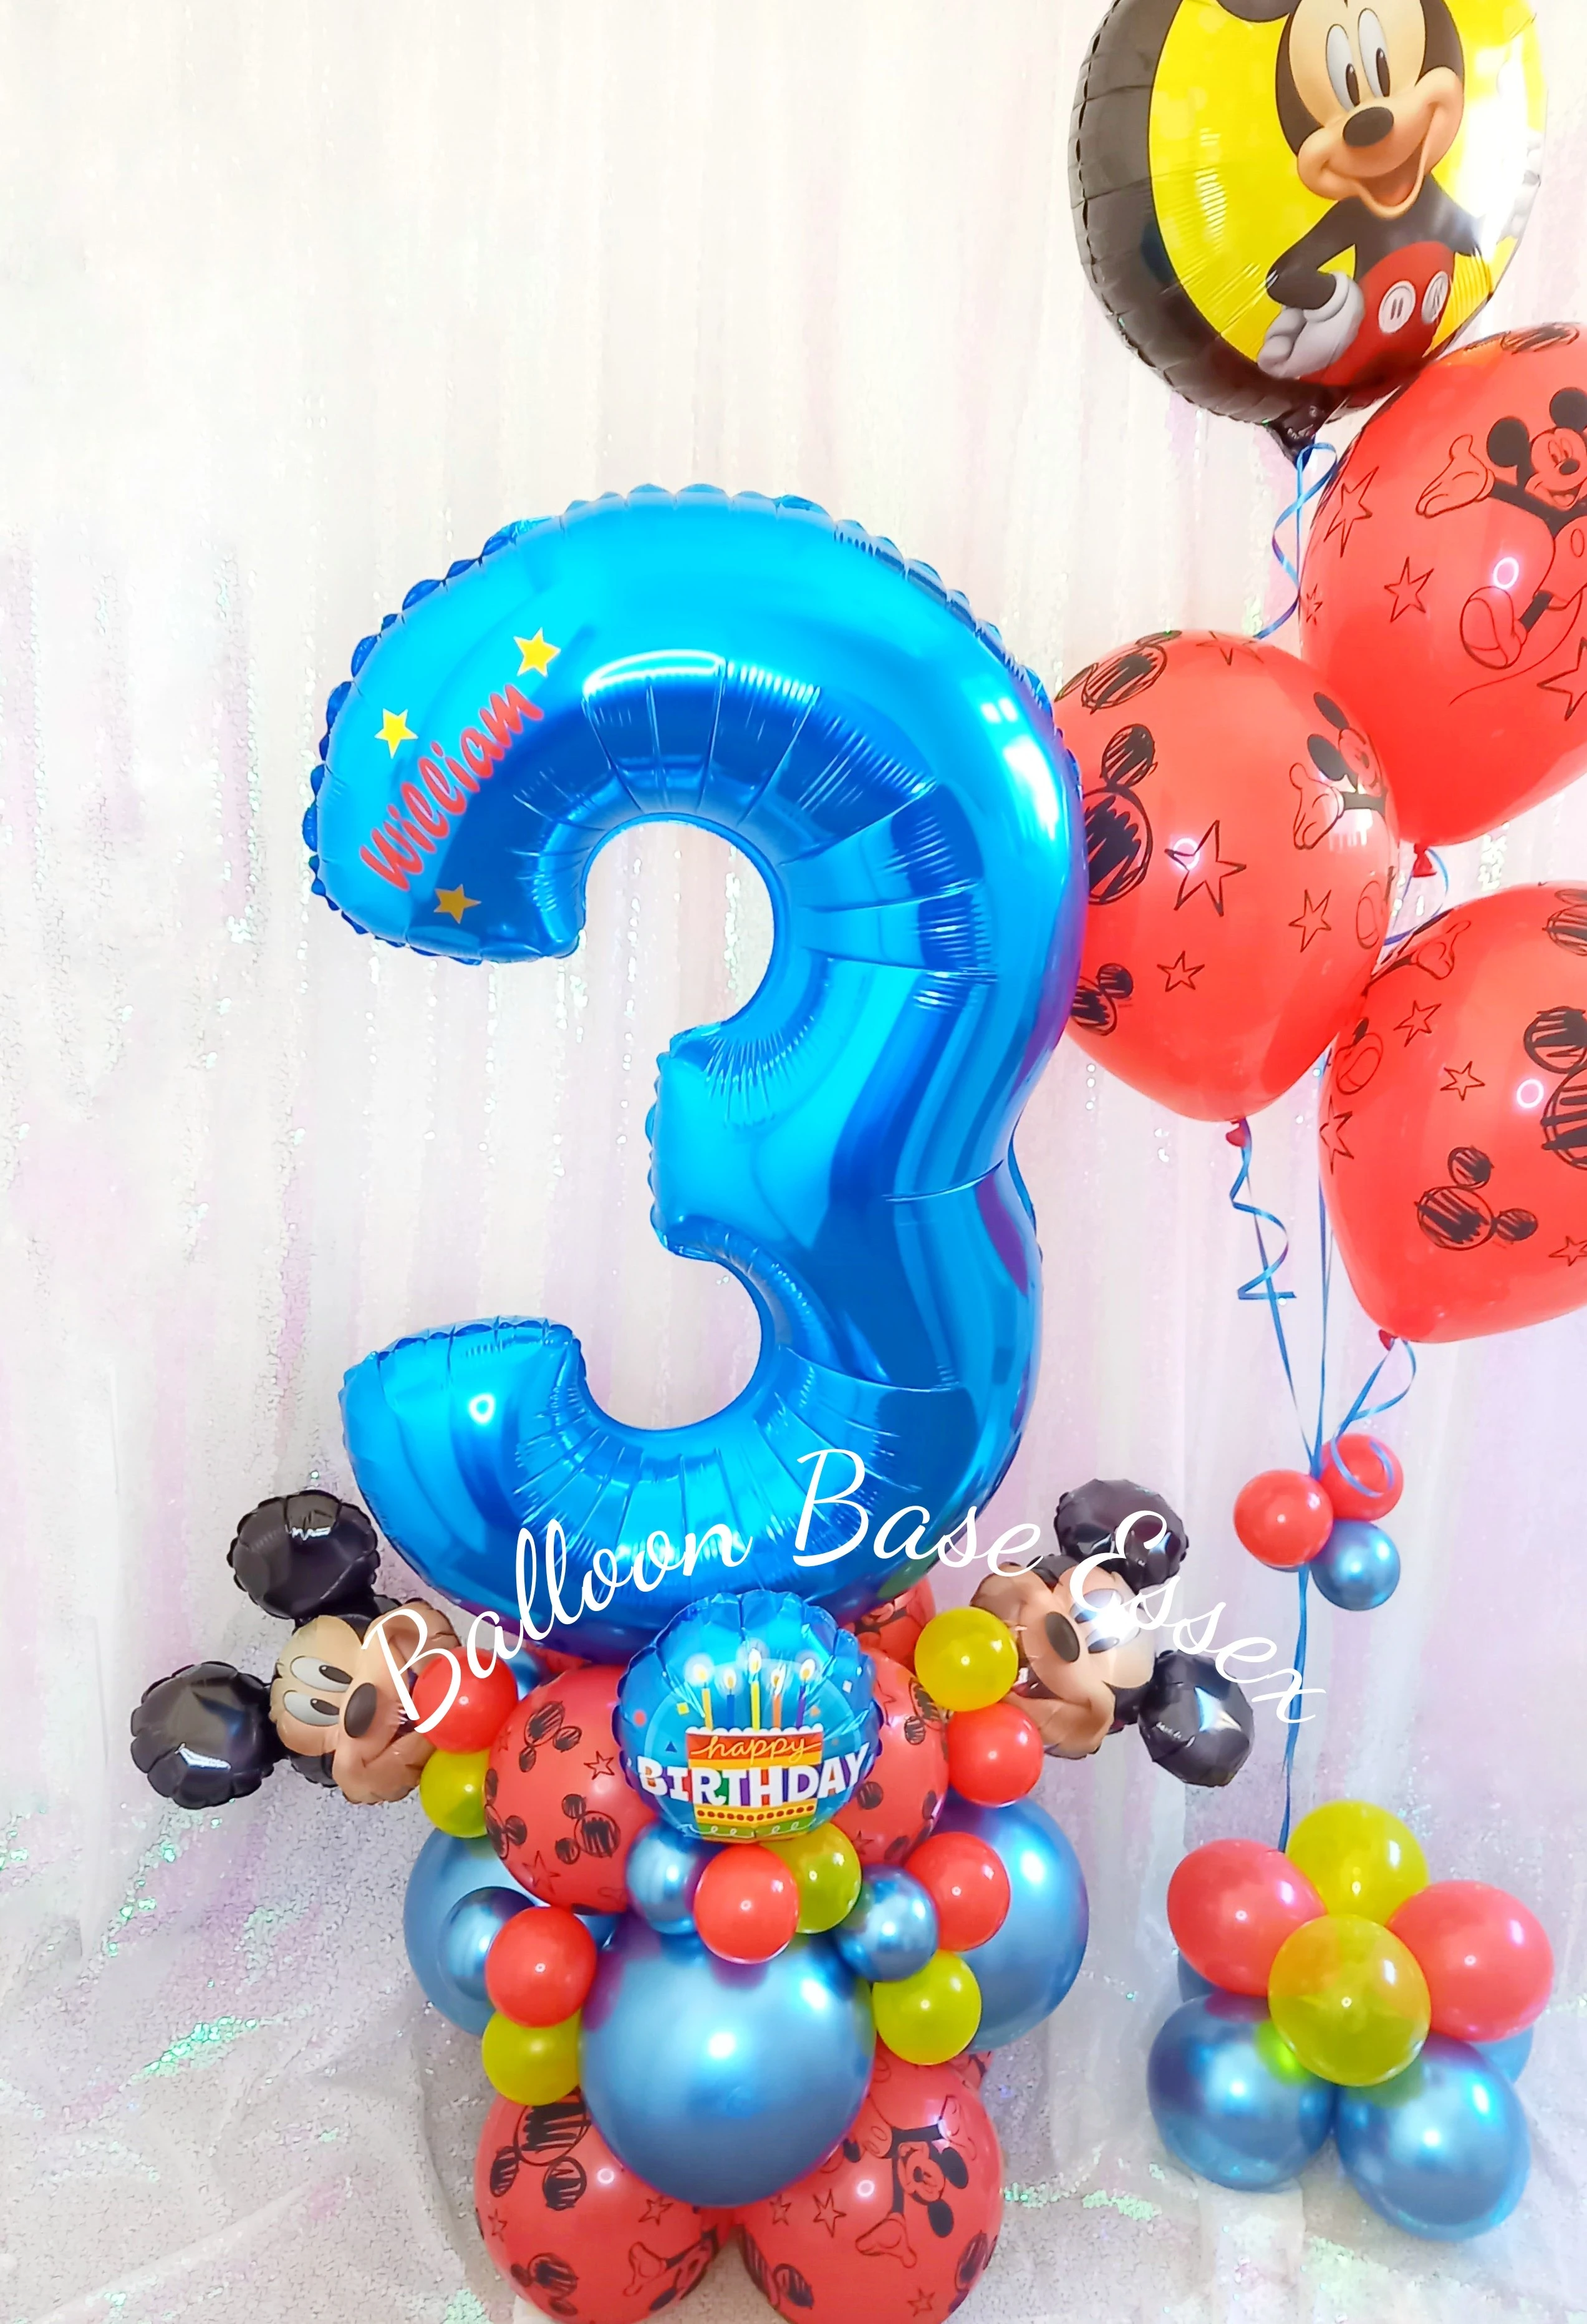 Mickey Mouse themed balloons in blue, red and yellow with a large blue number three balloon